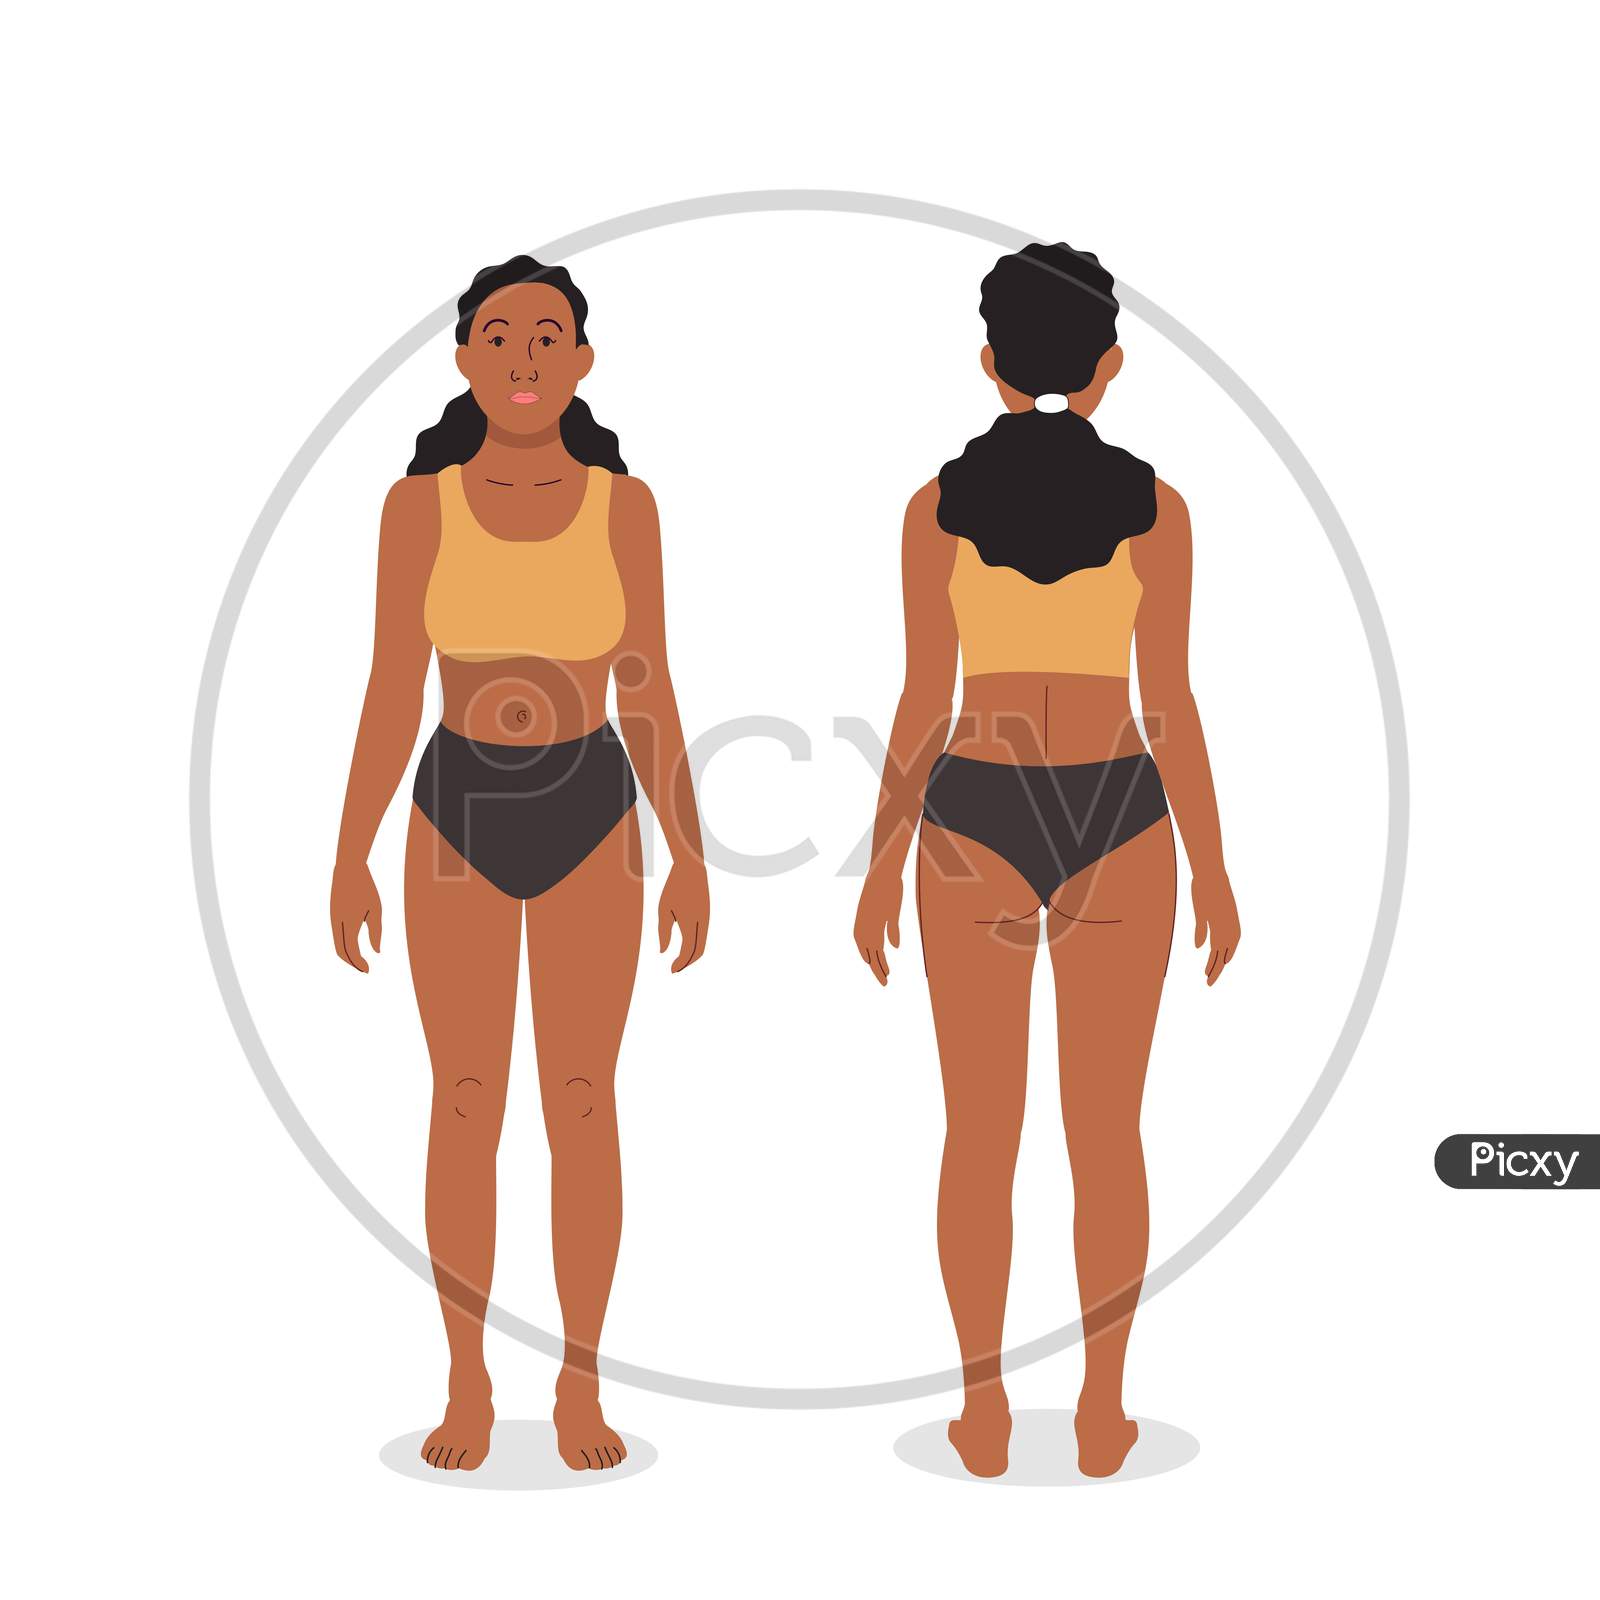 Female body template front and back | Female body front and back